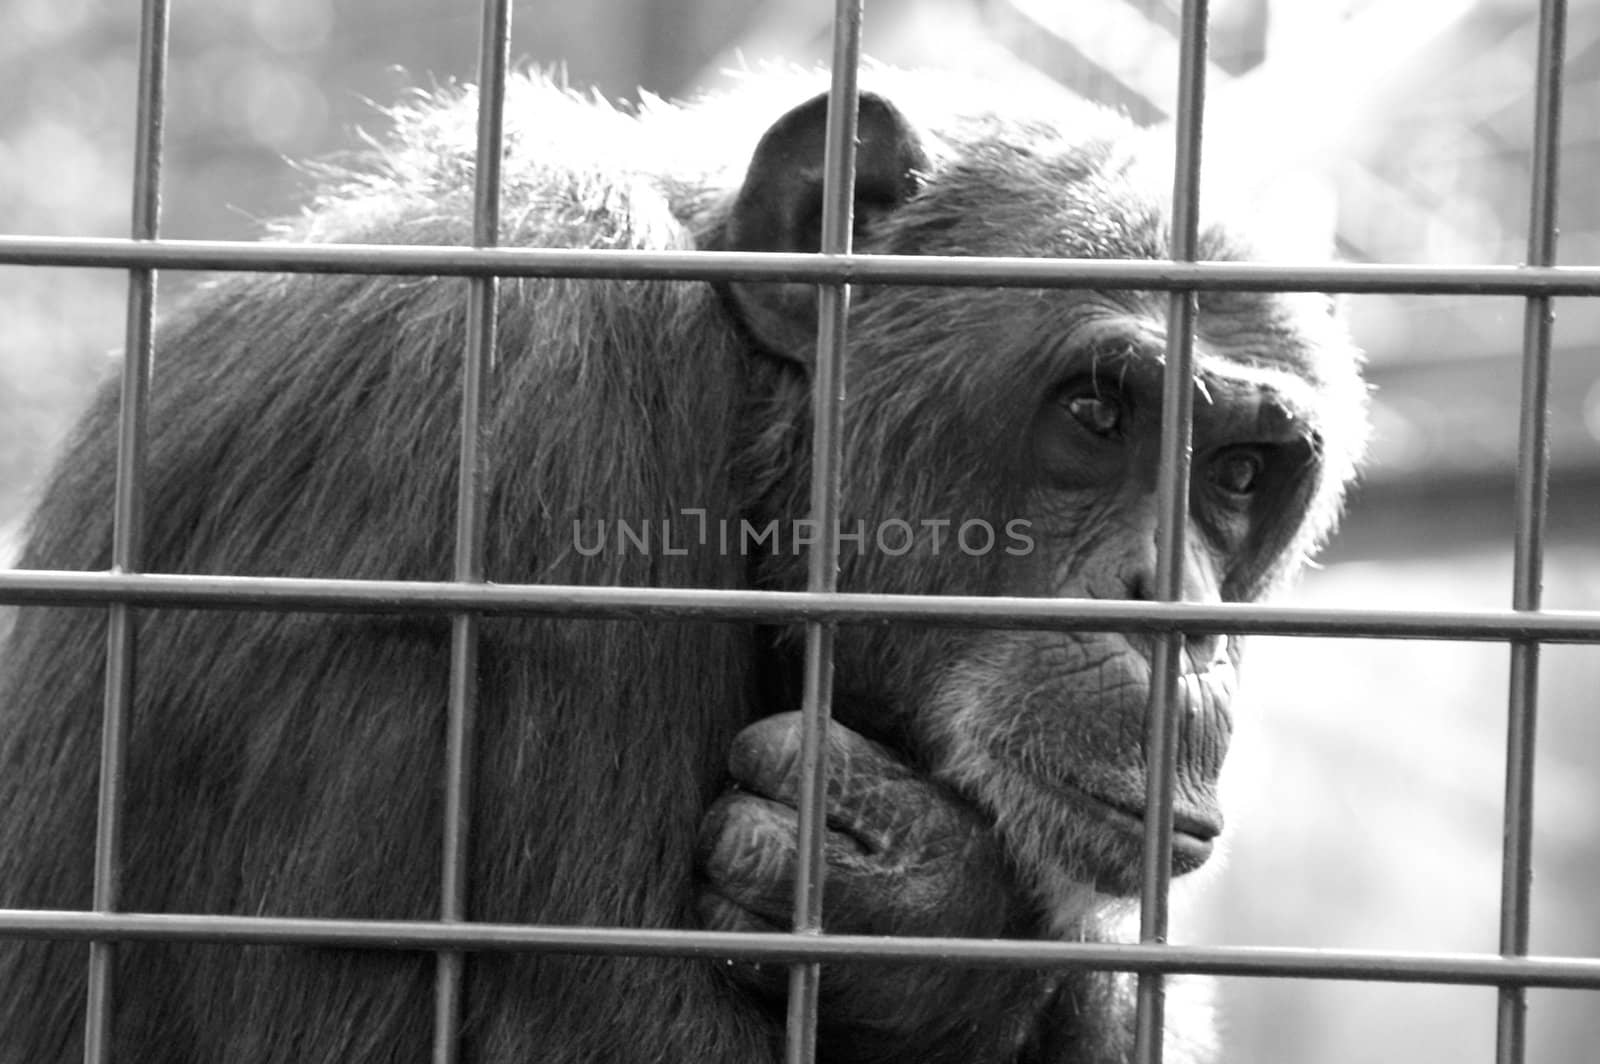 Monkey in a cage thinking by photochecker